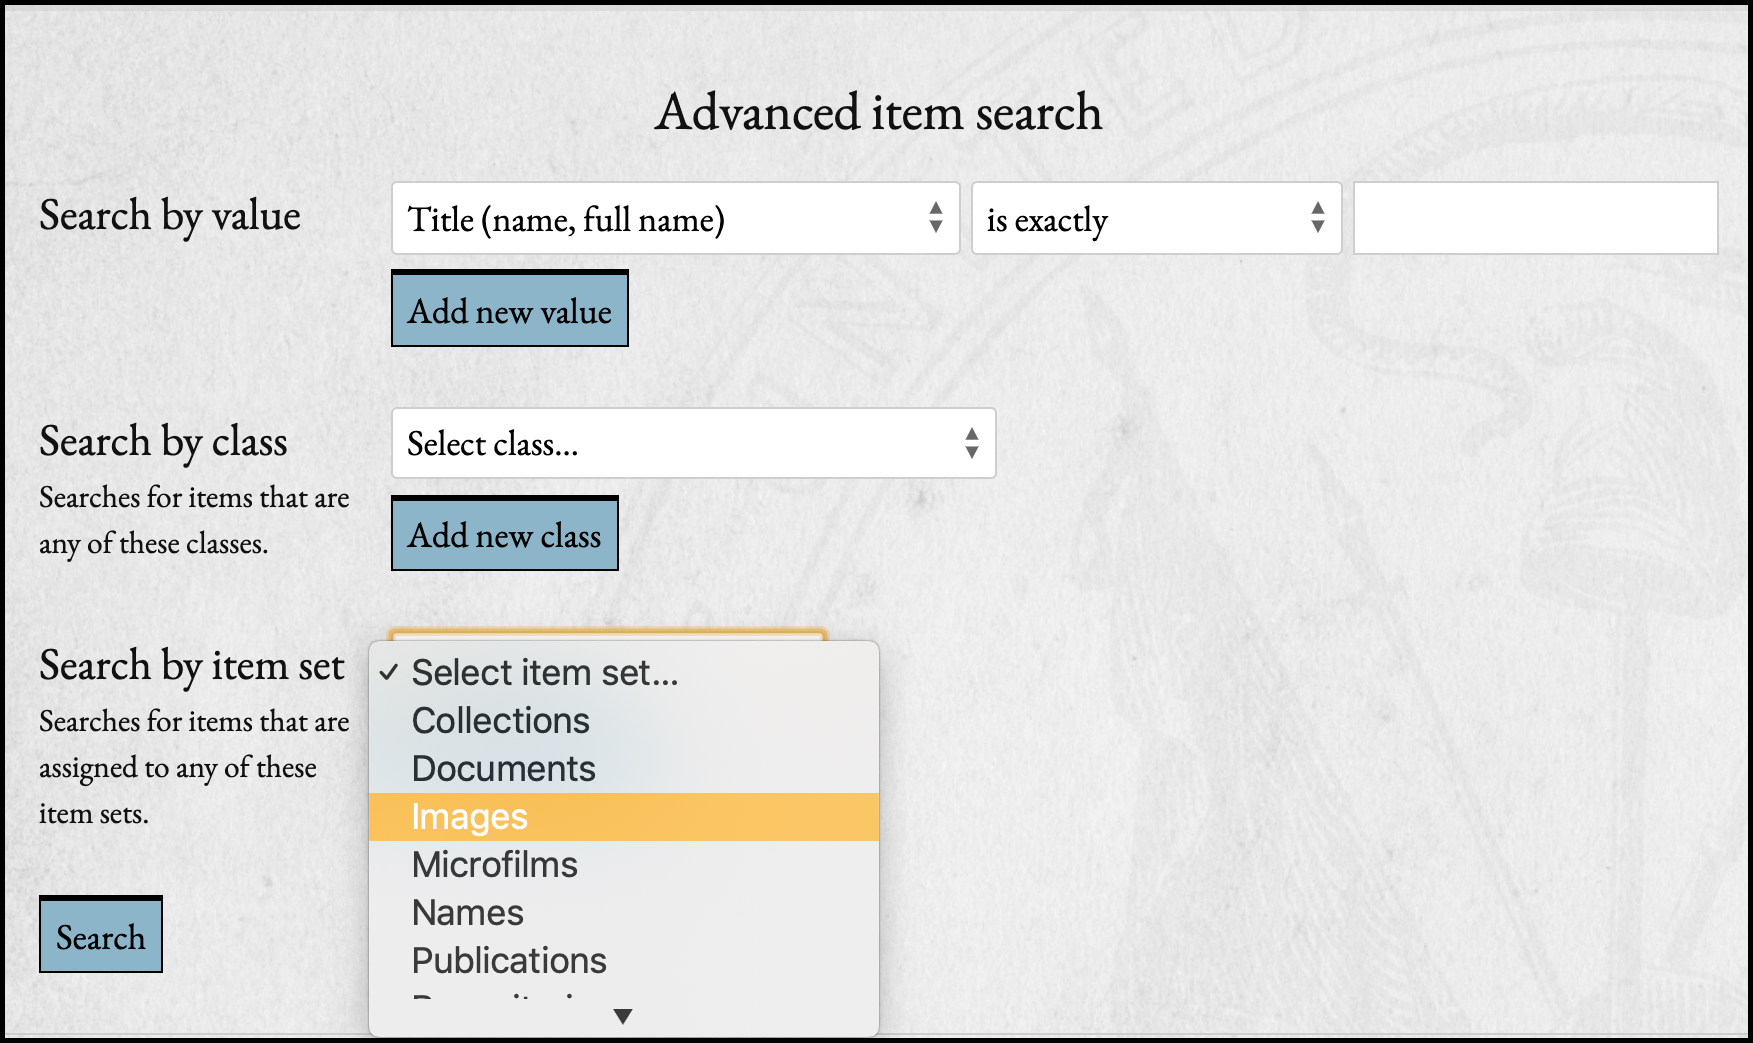 Detail screenshot of an advanced item search. The value is set to search "Title (name, full name)" and the Search by Item Set dropdown is open to select the Images item set.